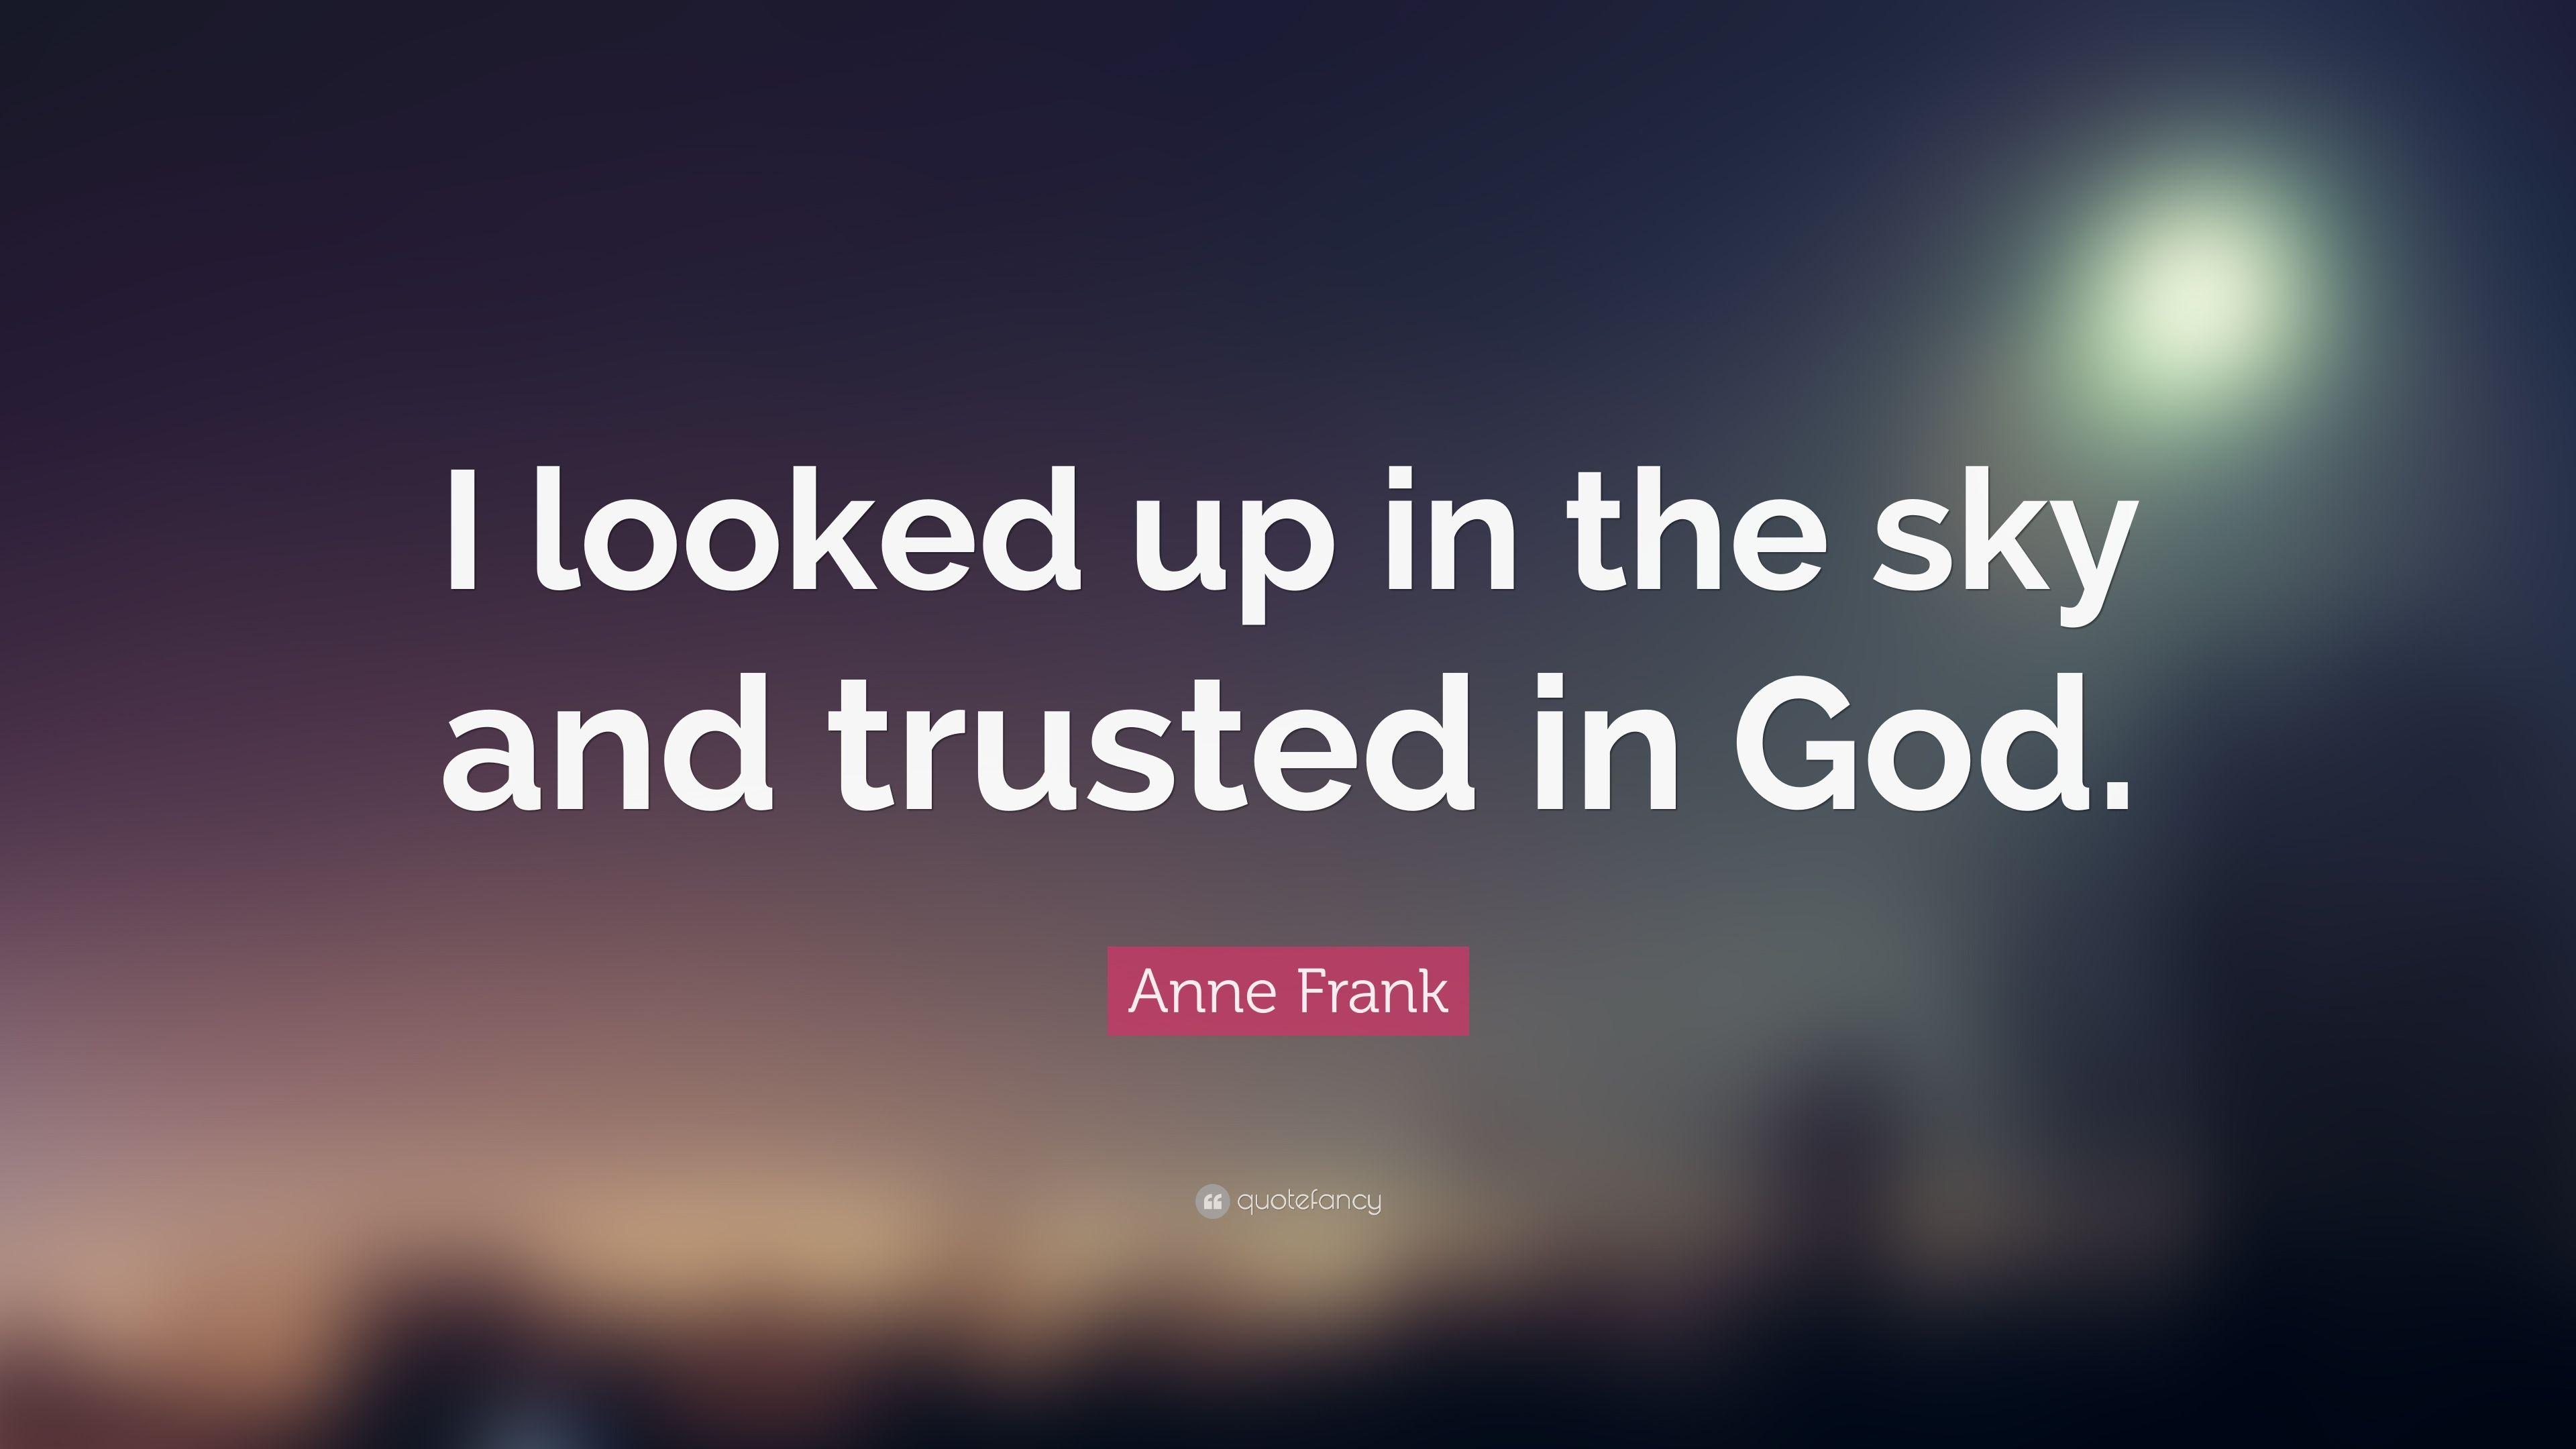 Anne Frank Quote: “I looked up in the sky and trusted in God.” 12